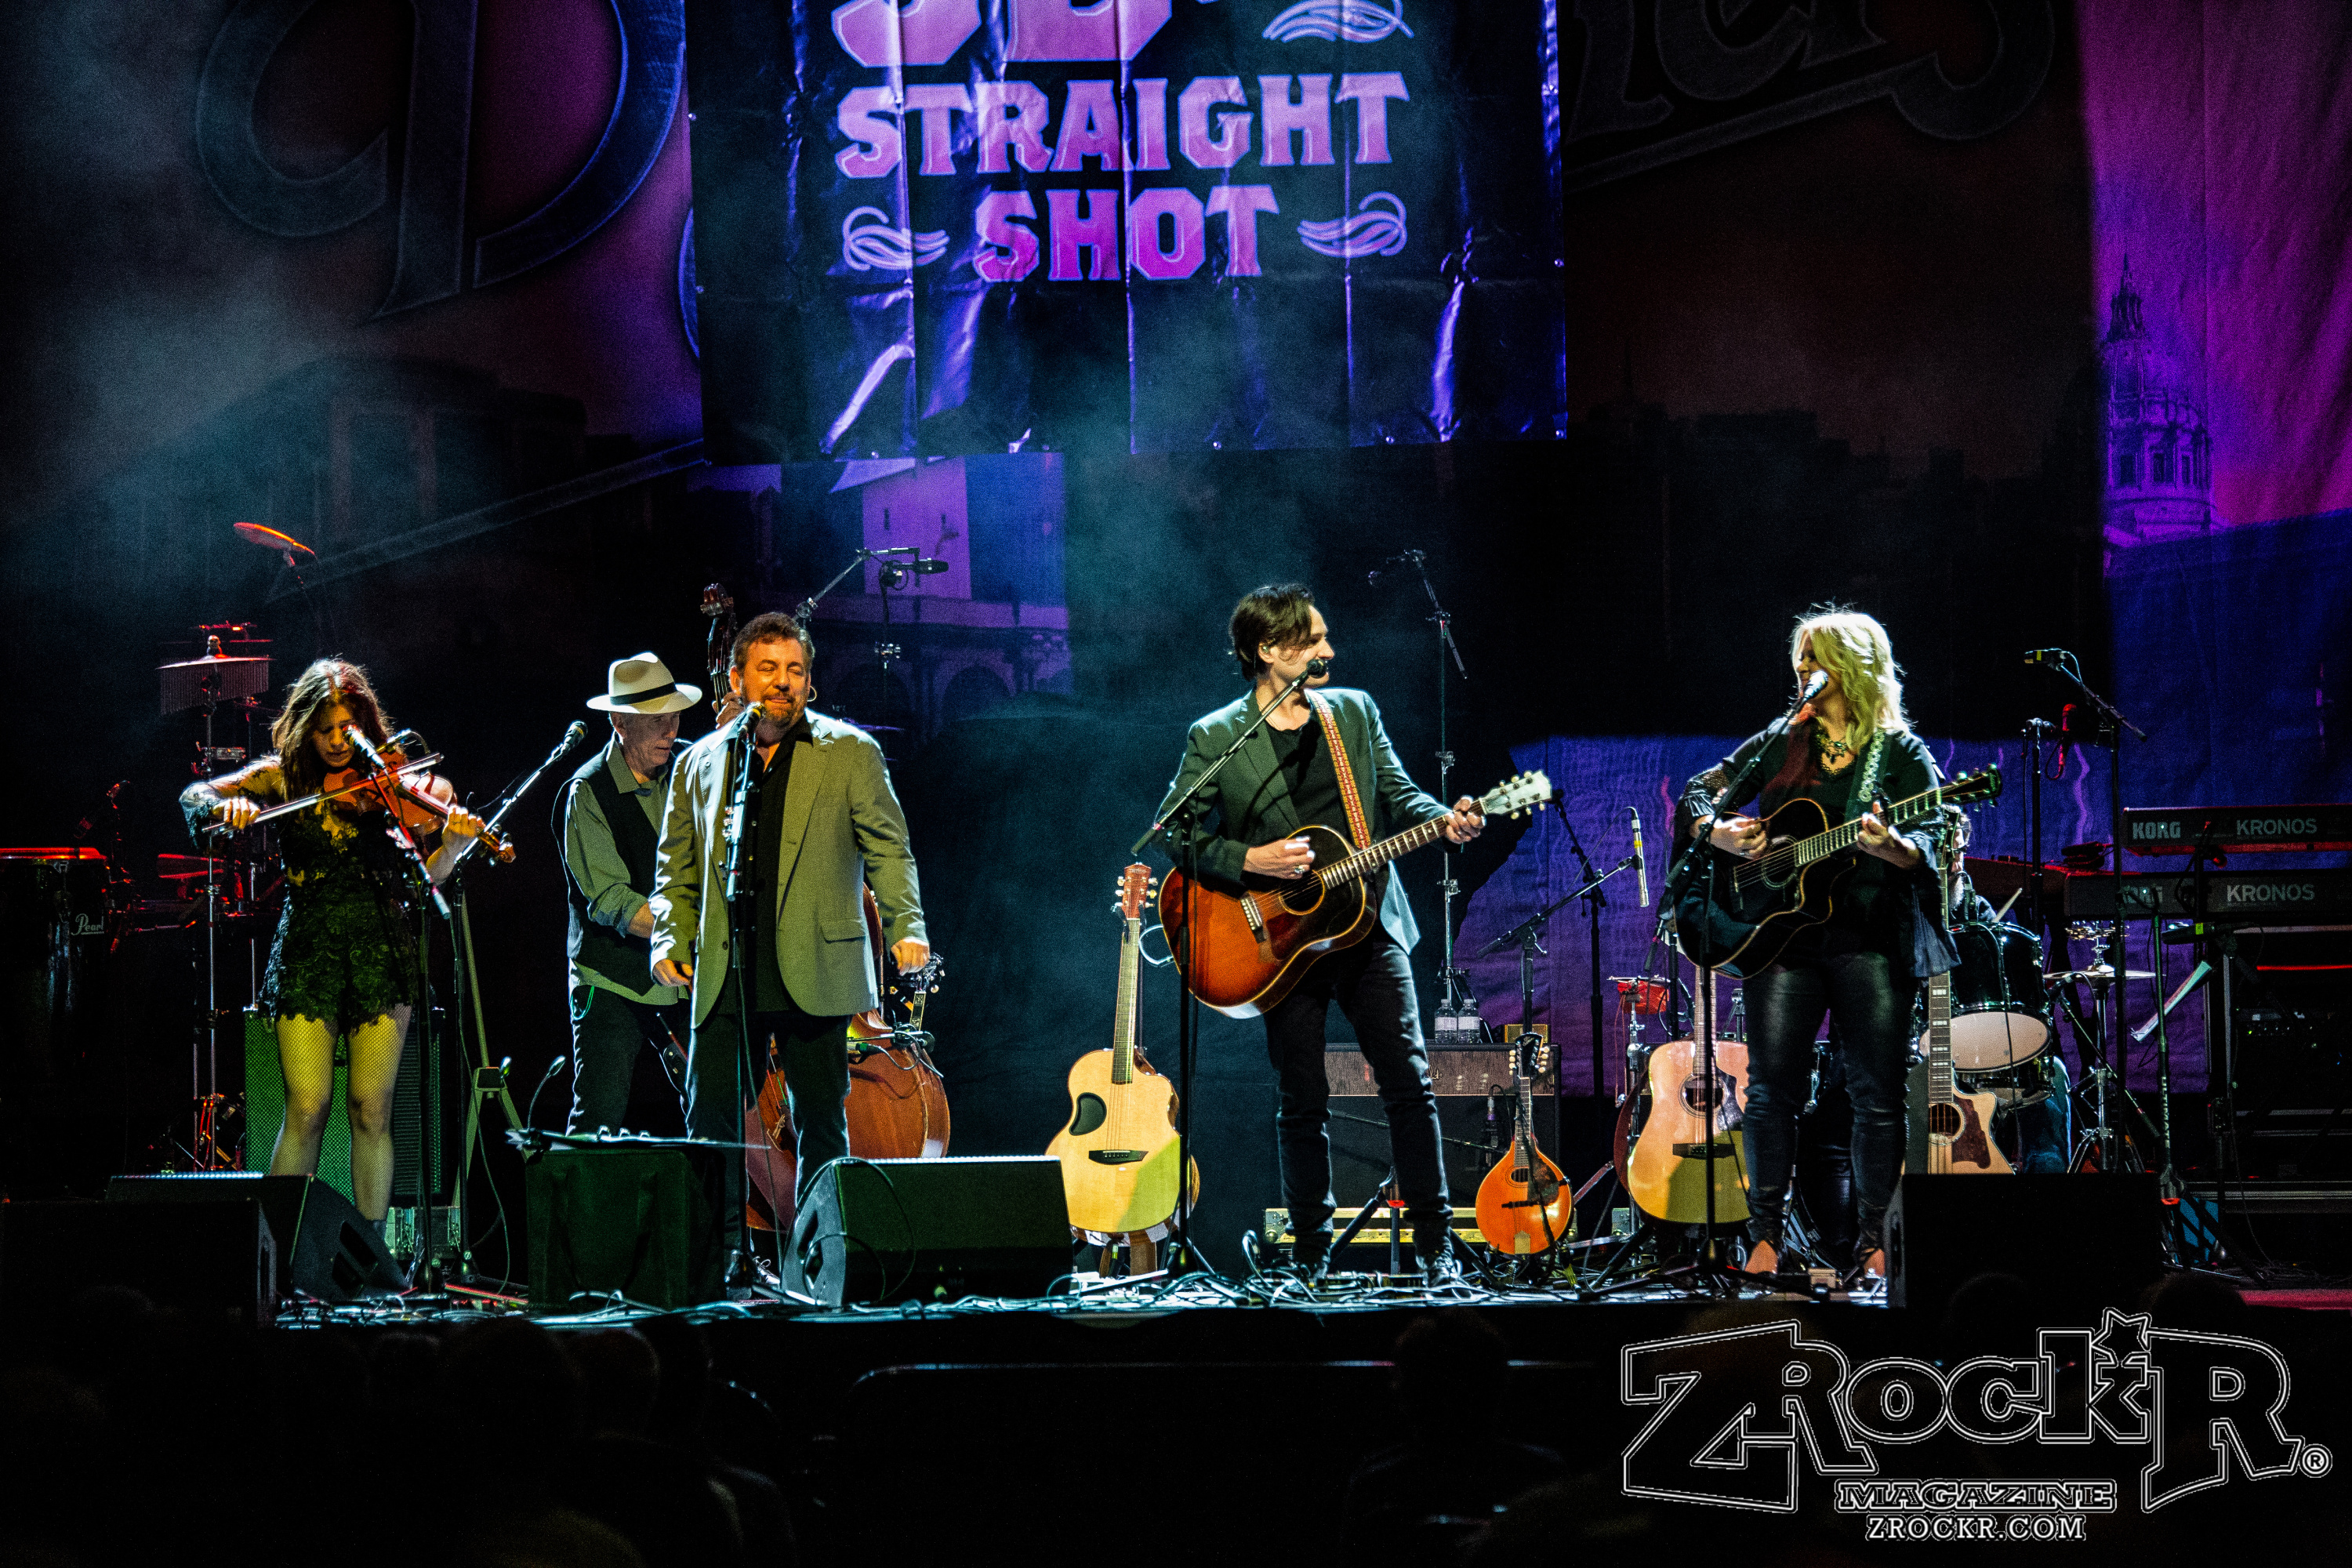 JD and the Straight Shot open up for The Doobie Brothers!